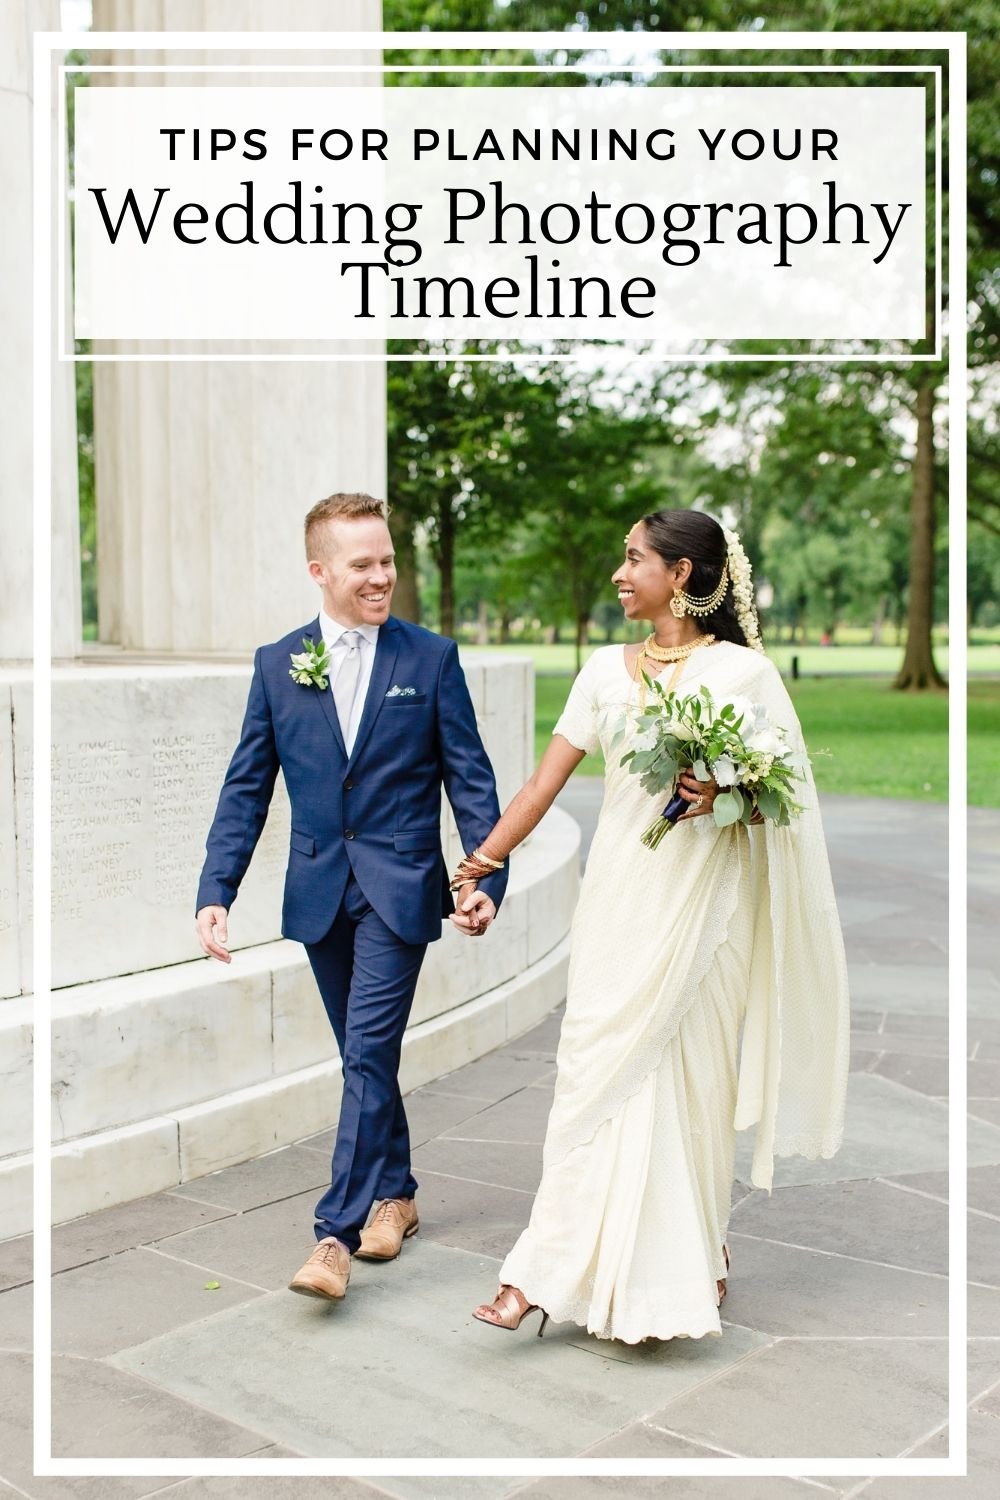 Tips for your wedding photography timeline